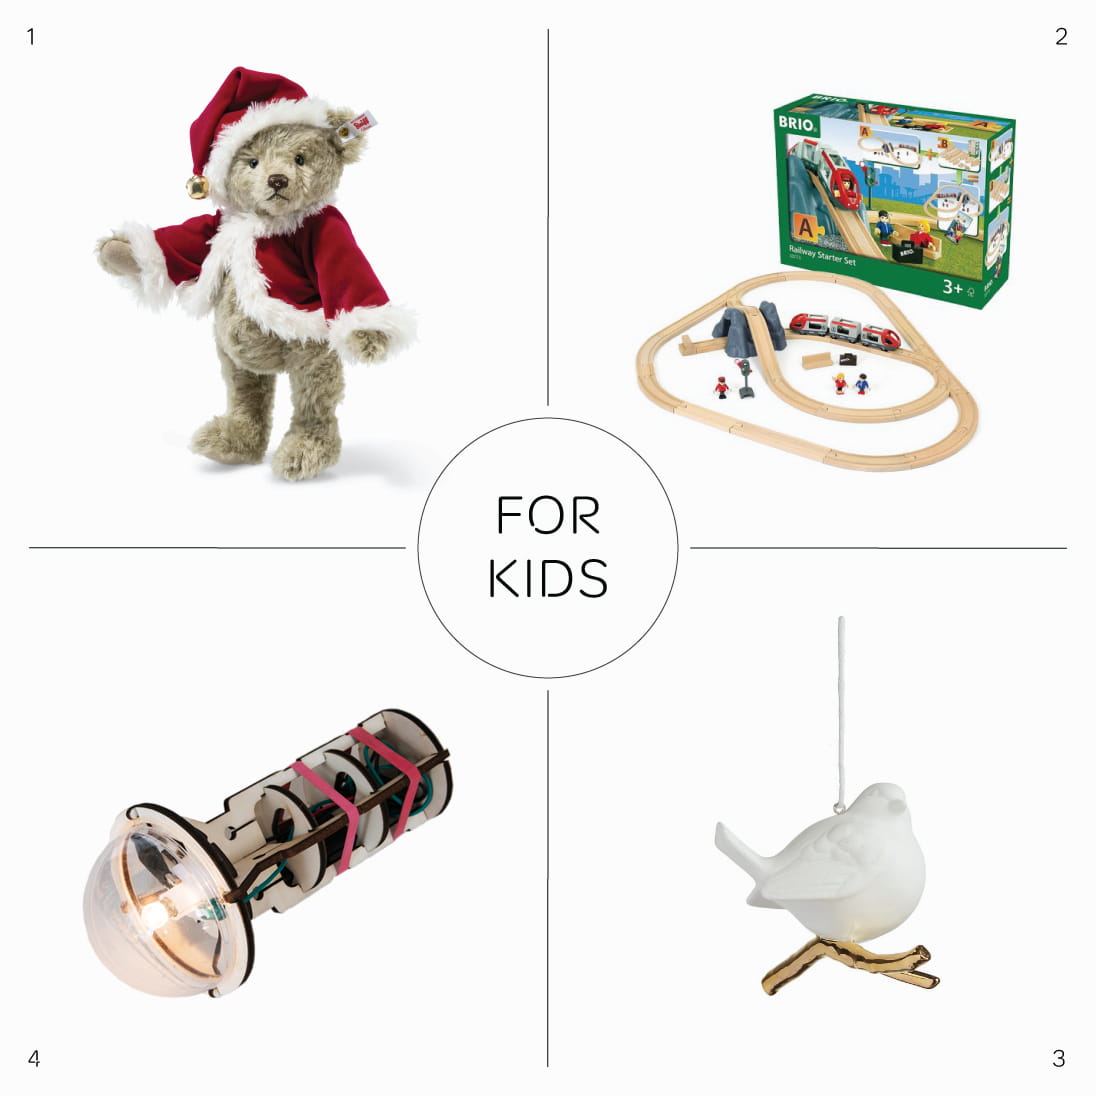 Gifts for kids